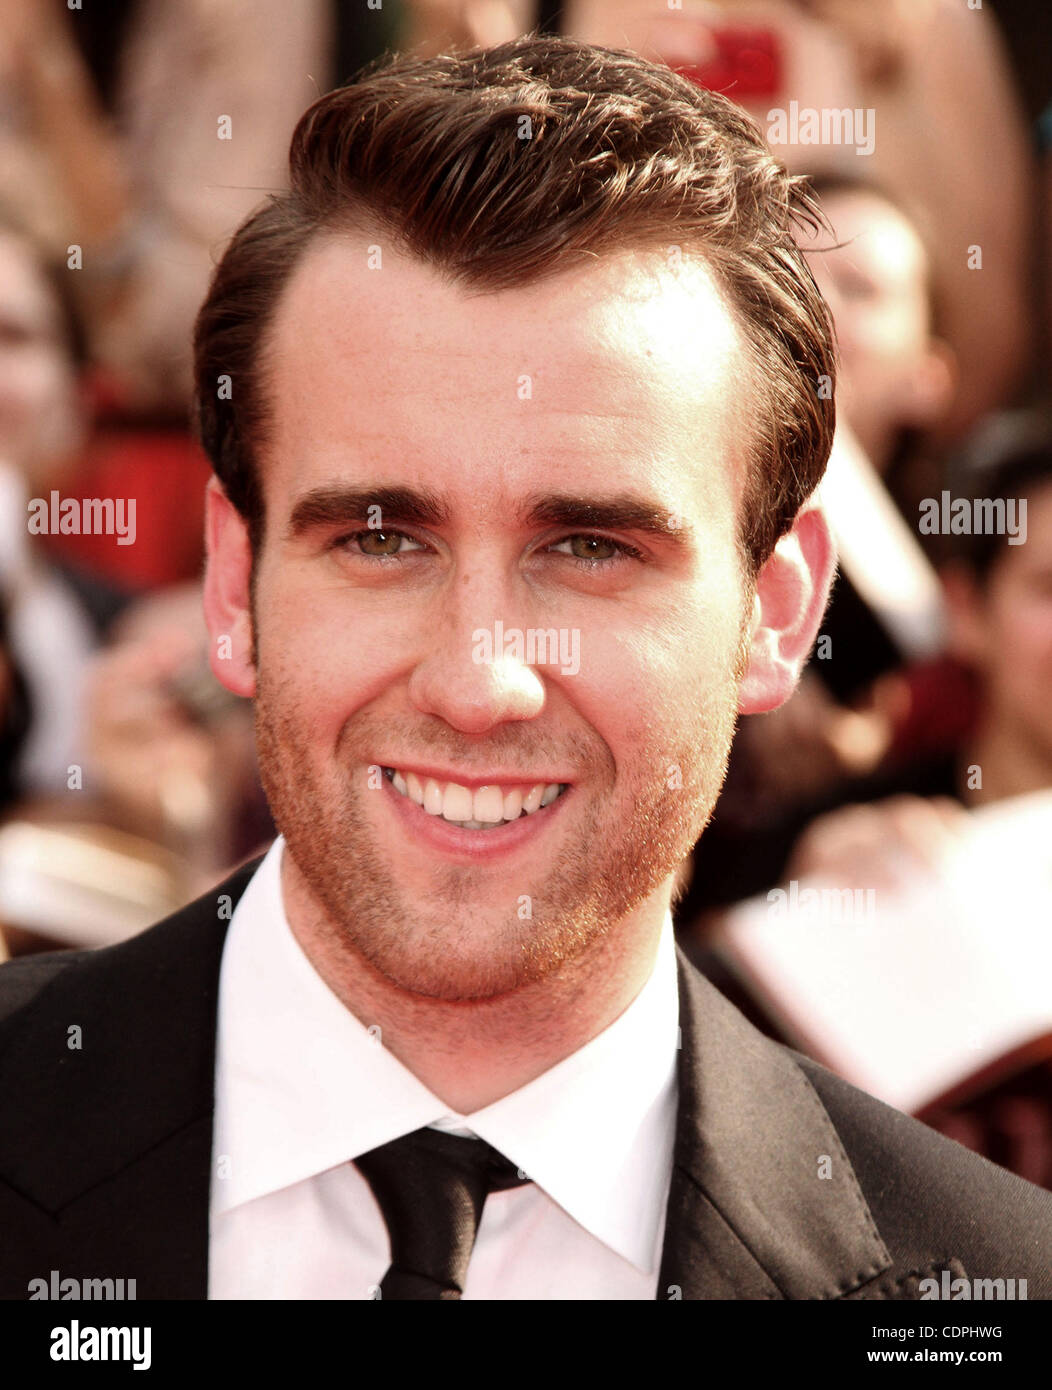 July 11, 2011 - New York, New York, U.S. - Actor MATTHEW LEWIS attends the New York premiere of 'Harry Potter and the Deathly Hallows - Part 2' held at Avery Fisher Hall at Lincoln Center. (Credit Image: © Nancy Kaszerman/ZUMAPRESS.com) Stock Photo